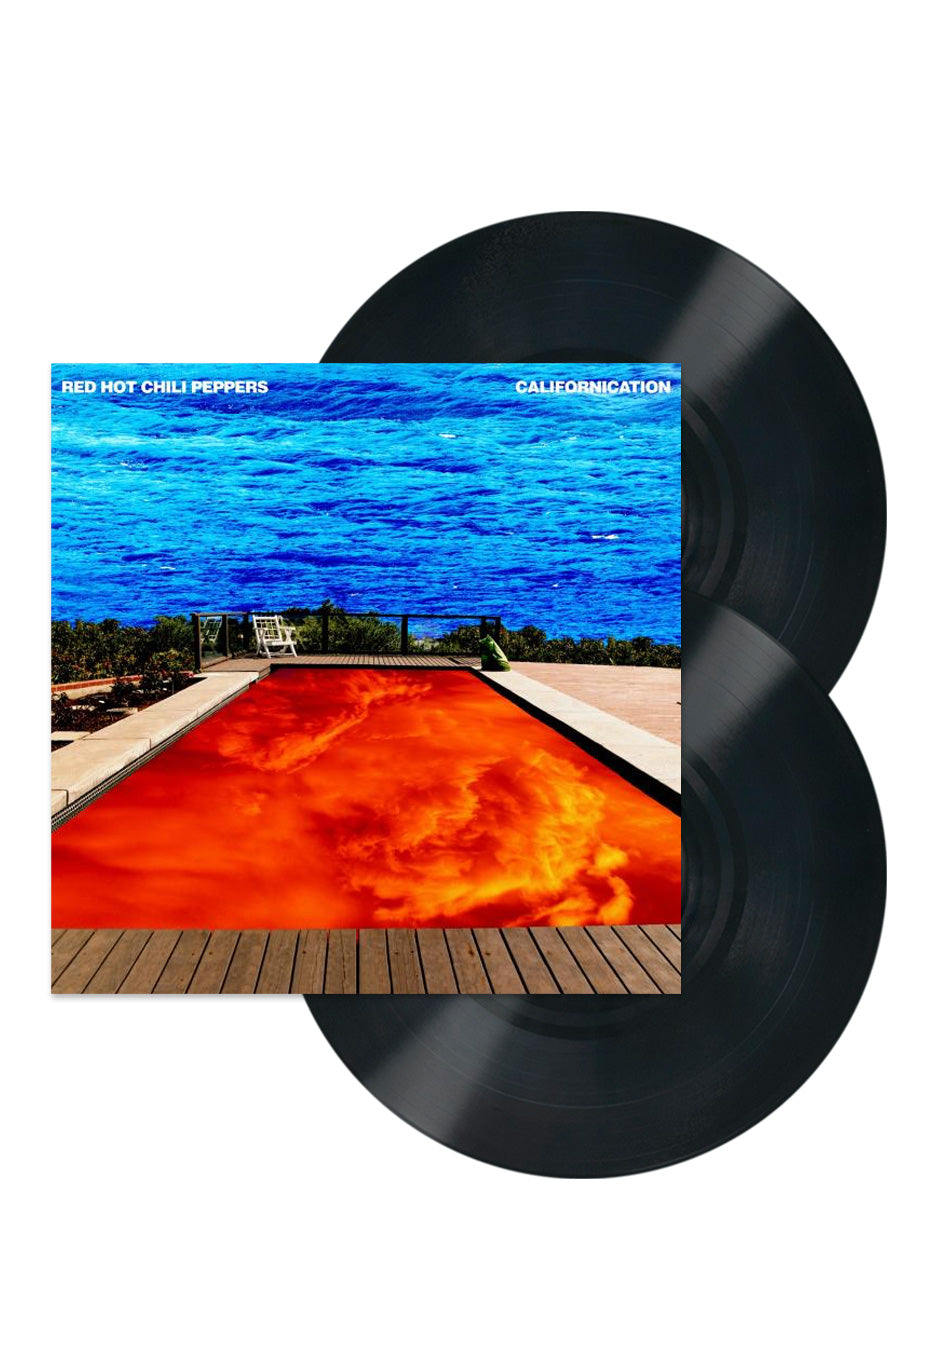 Red Hot Chili Peppers: Californication 2 lps - Black Vinyl Records Spain